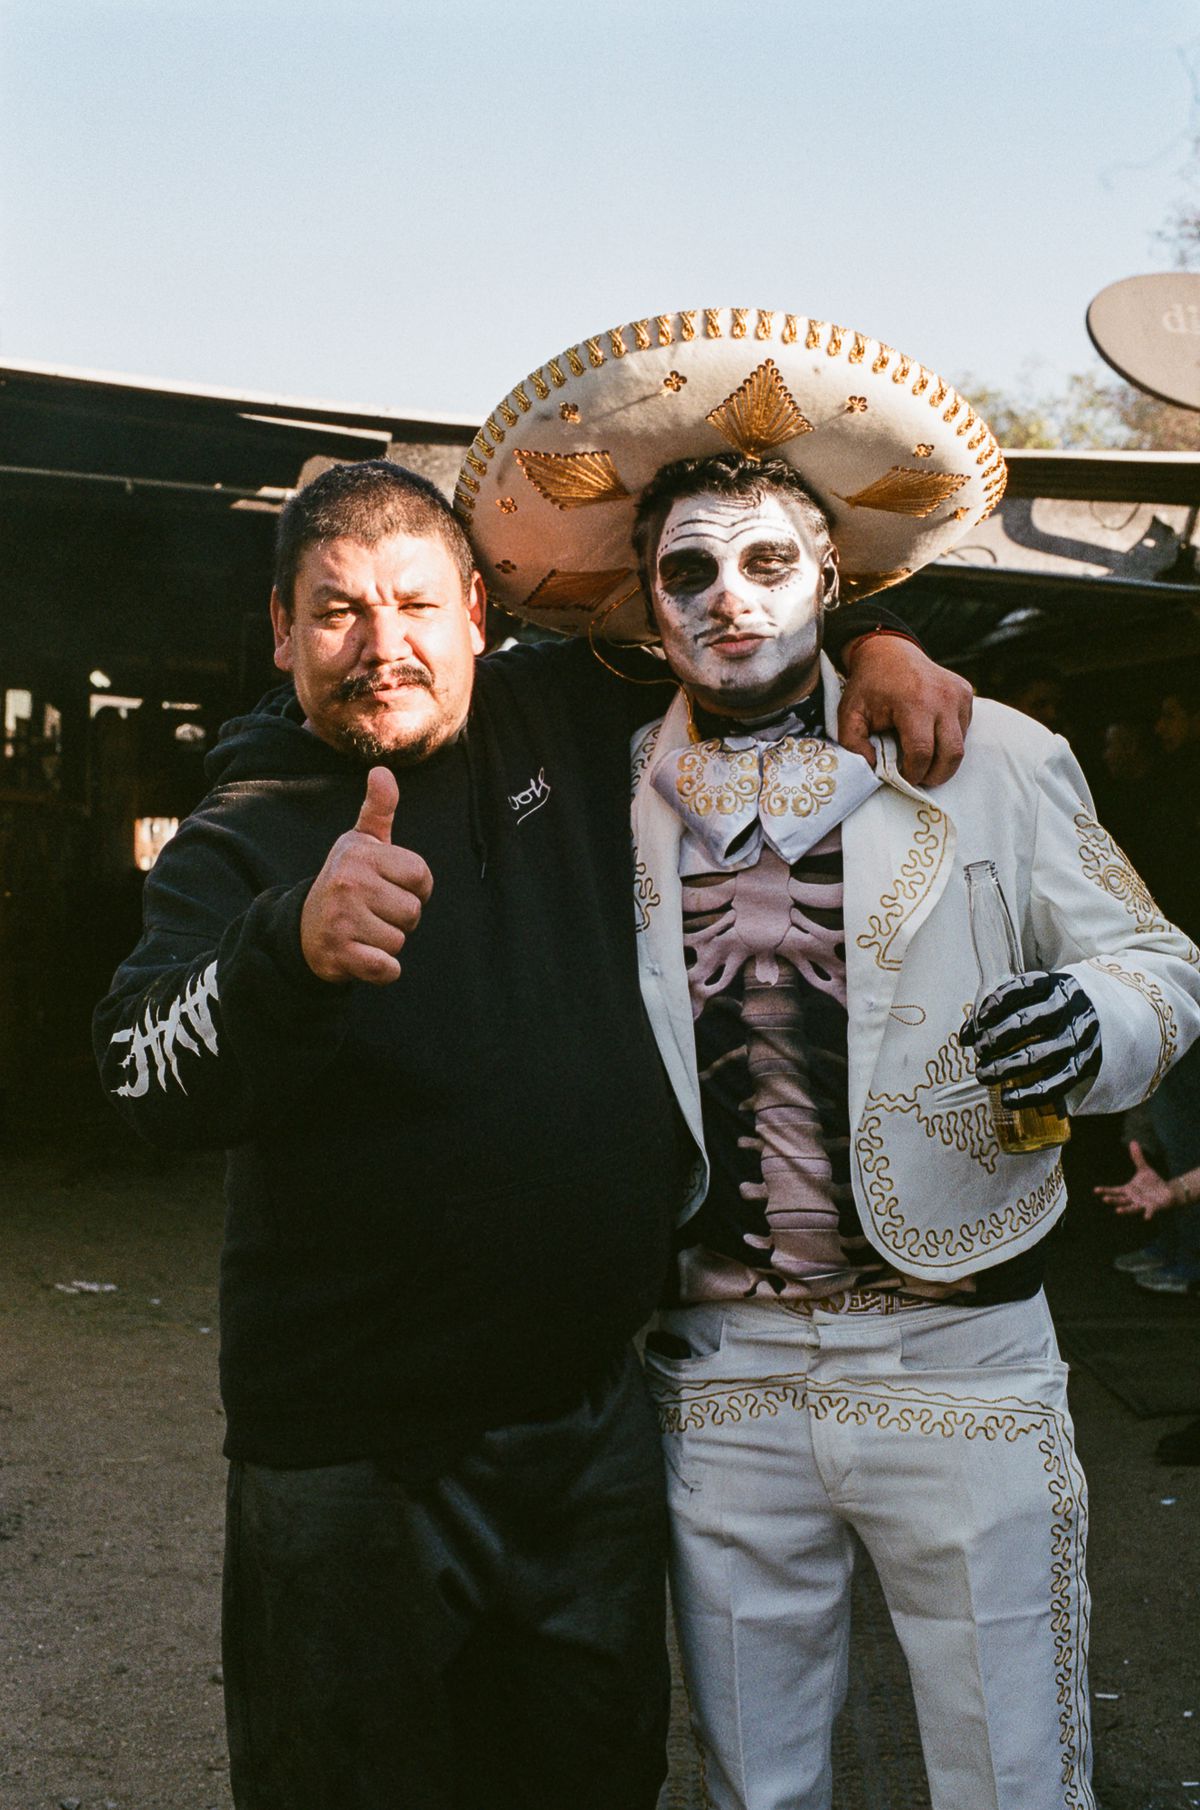 A costumed banda performer poses with a fan who’s holding his thumb up.